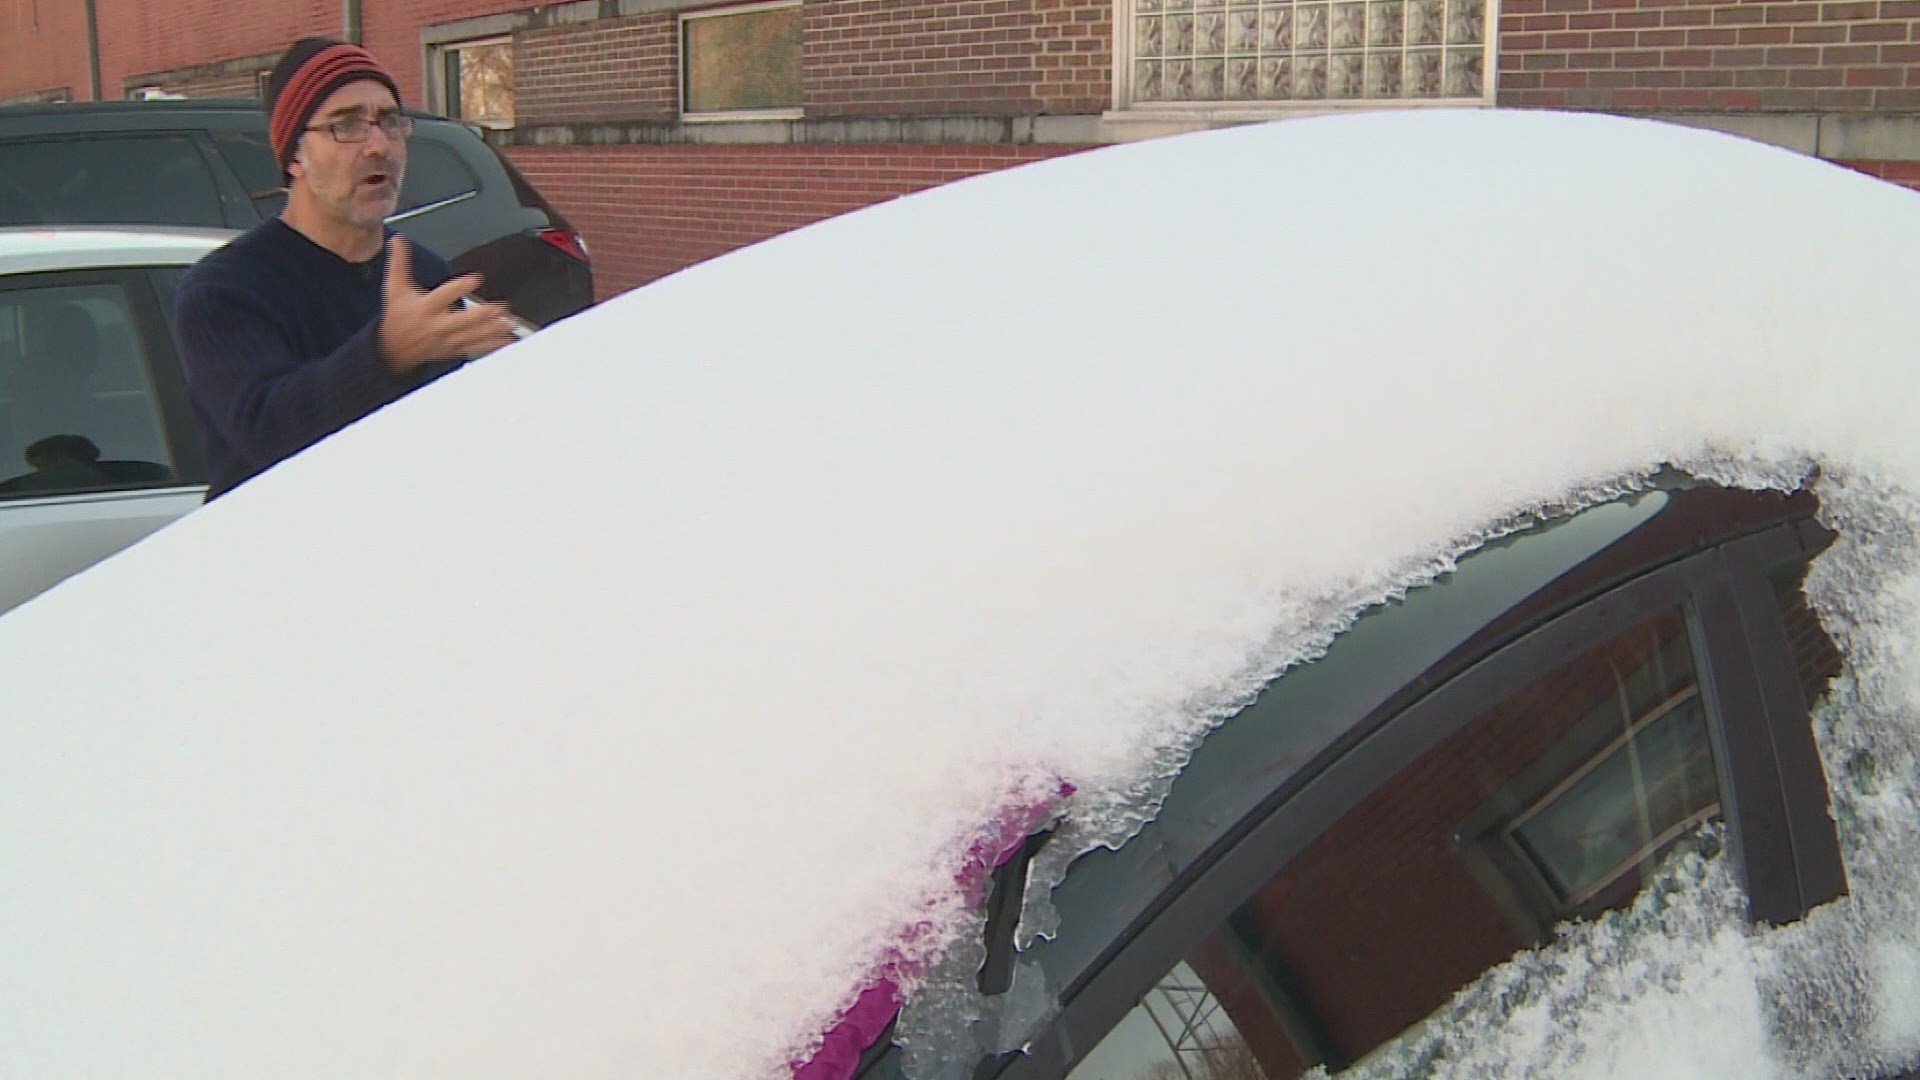 While you can't get in trouble with the law, not clearing snow off your car could get you into a whole lot of legal trouble.